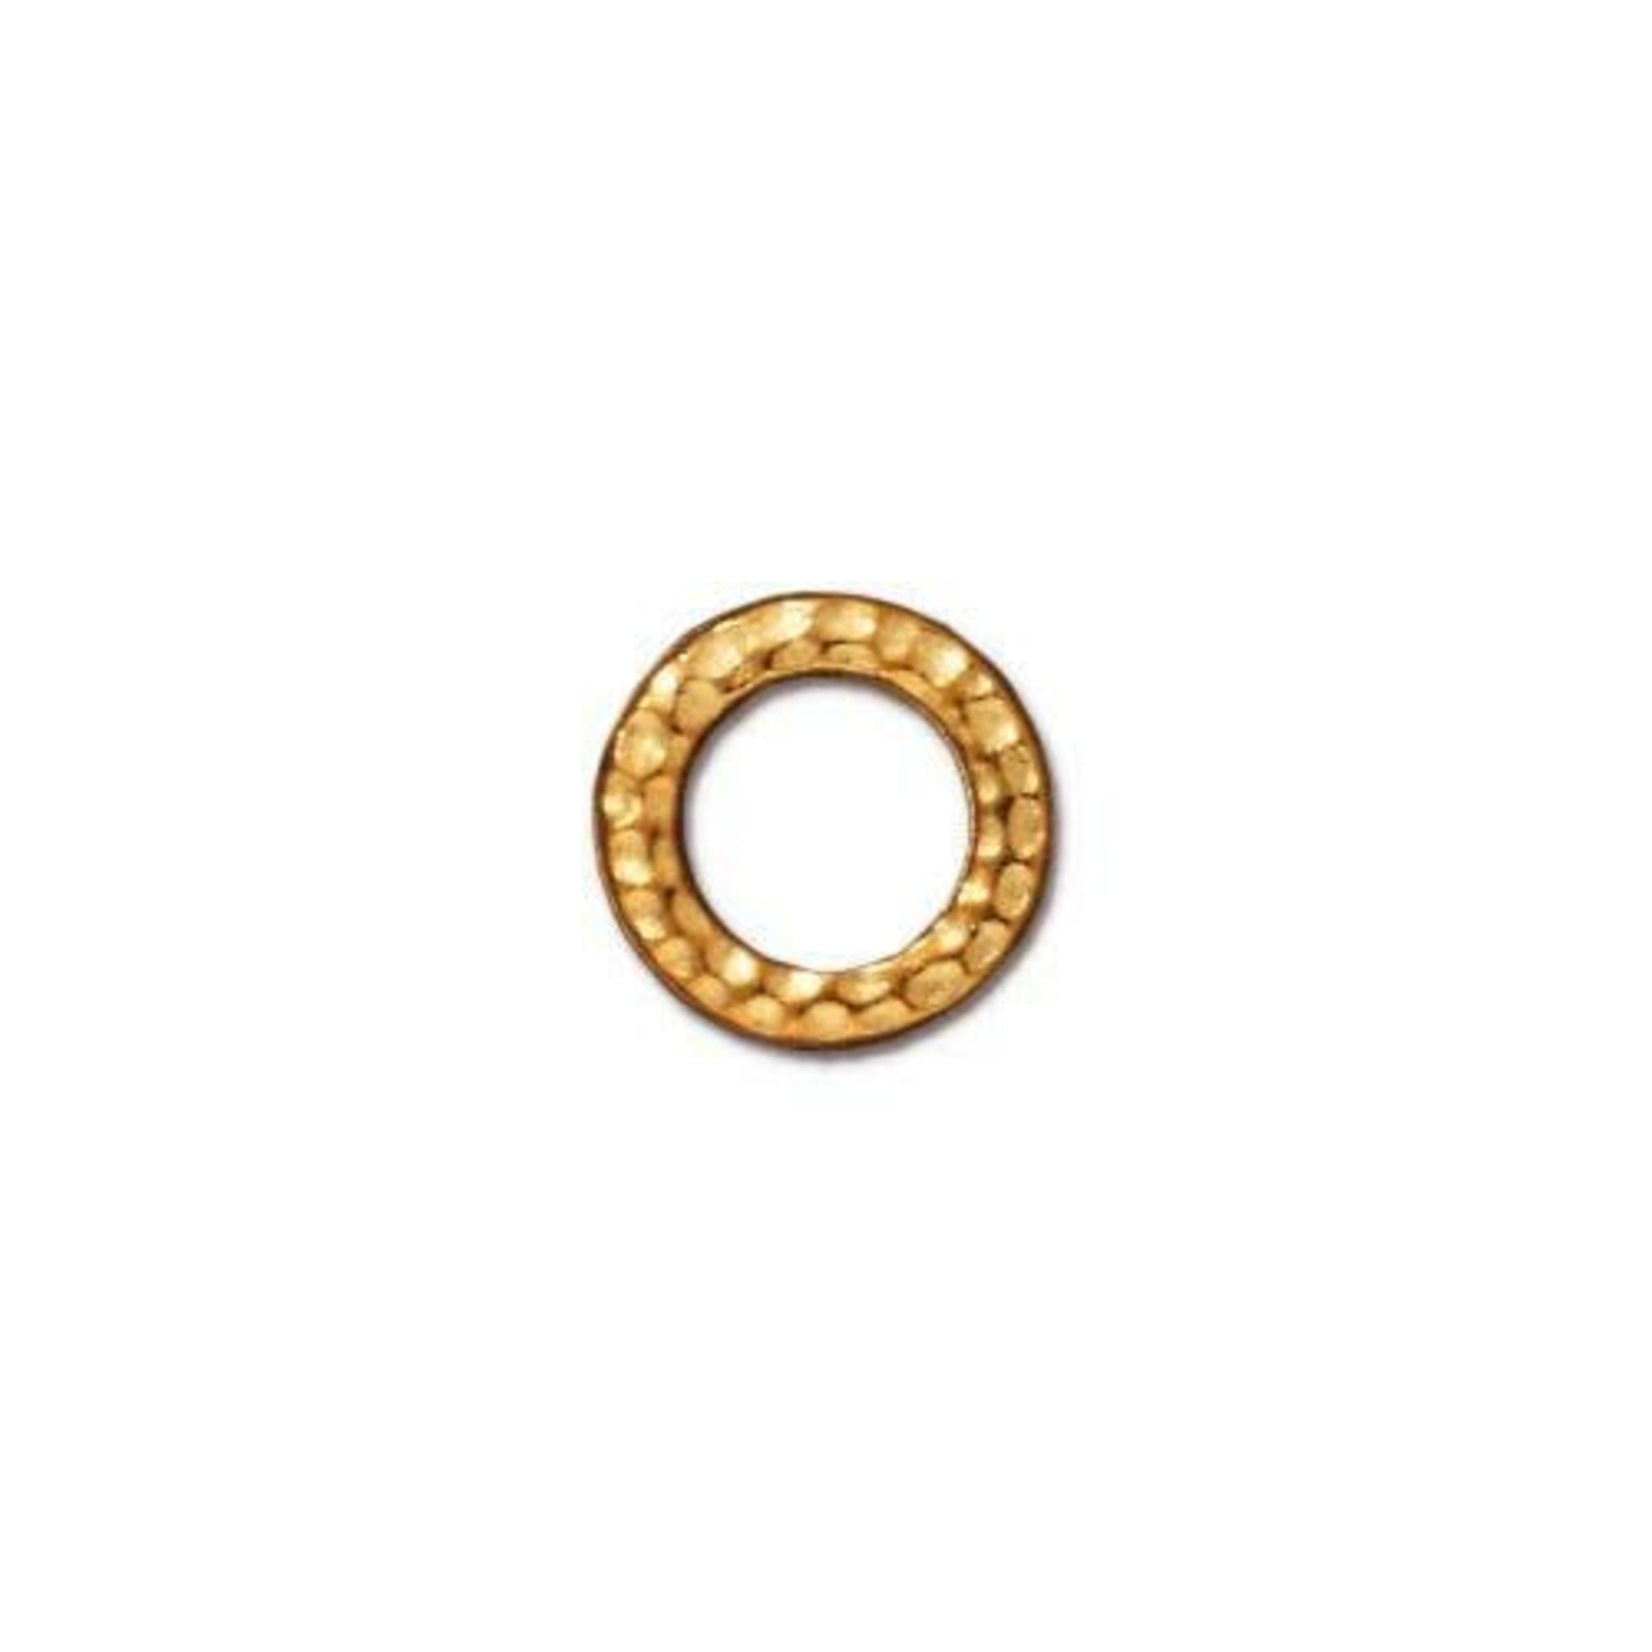 TierraCast Tierracast Gold Plated Hammertone Small Ring